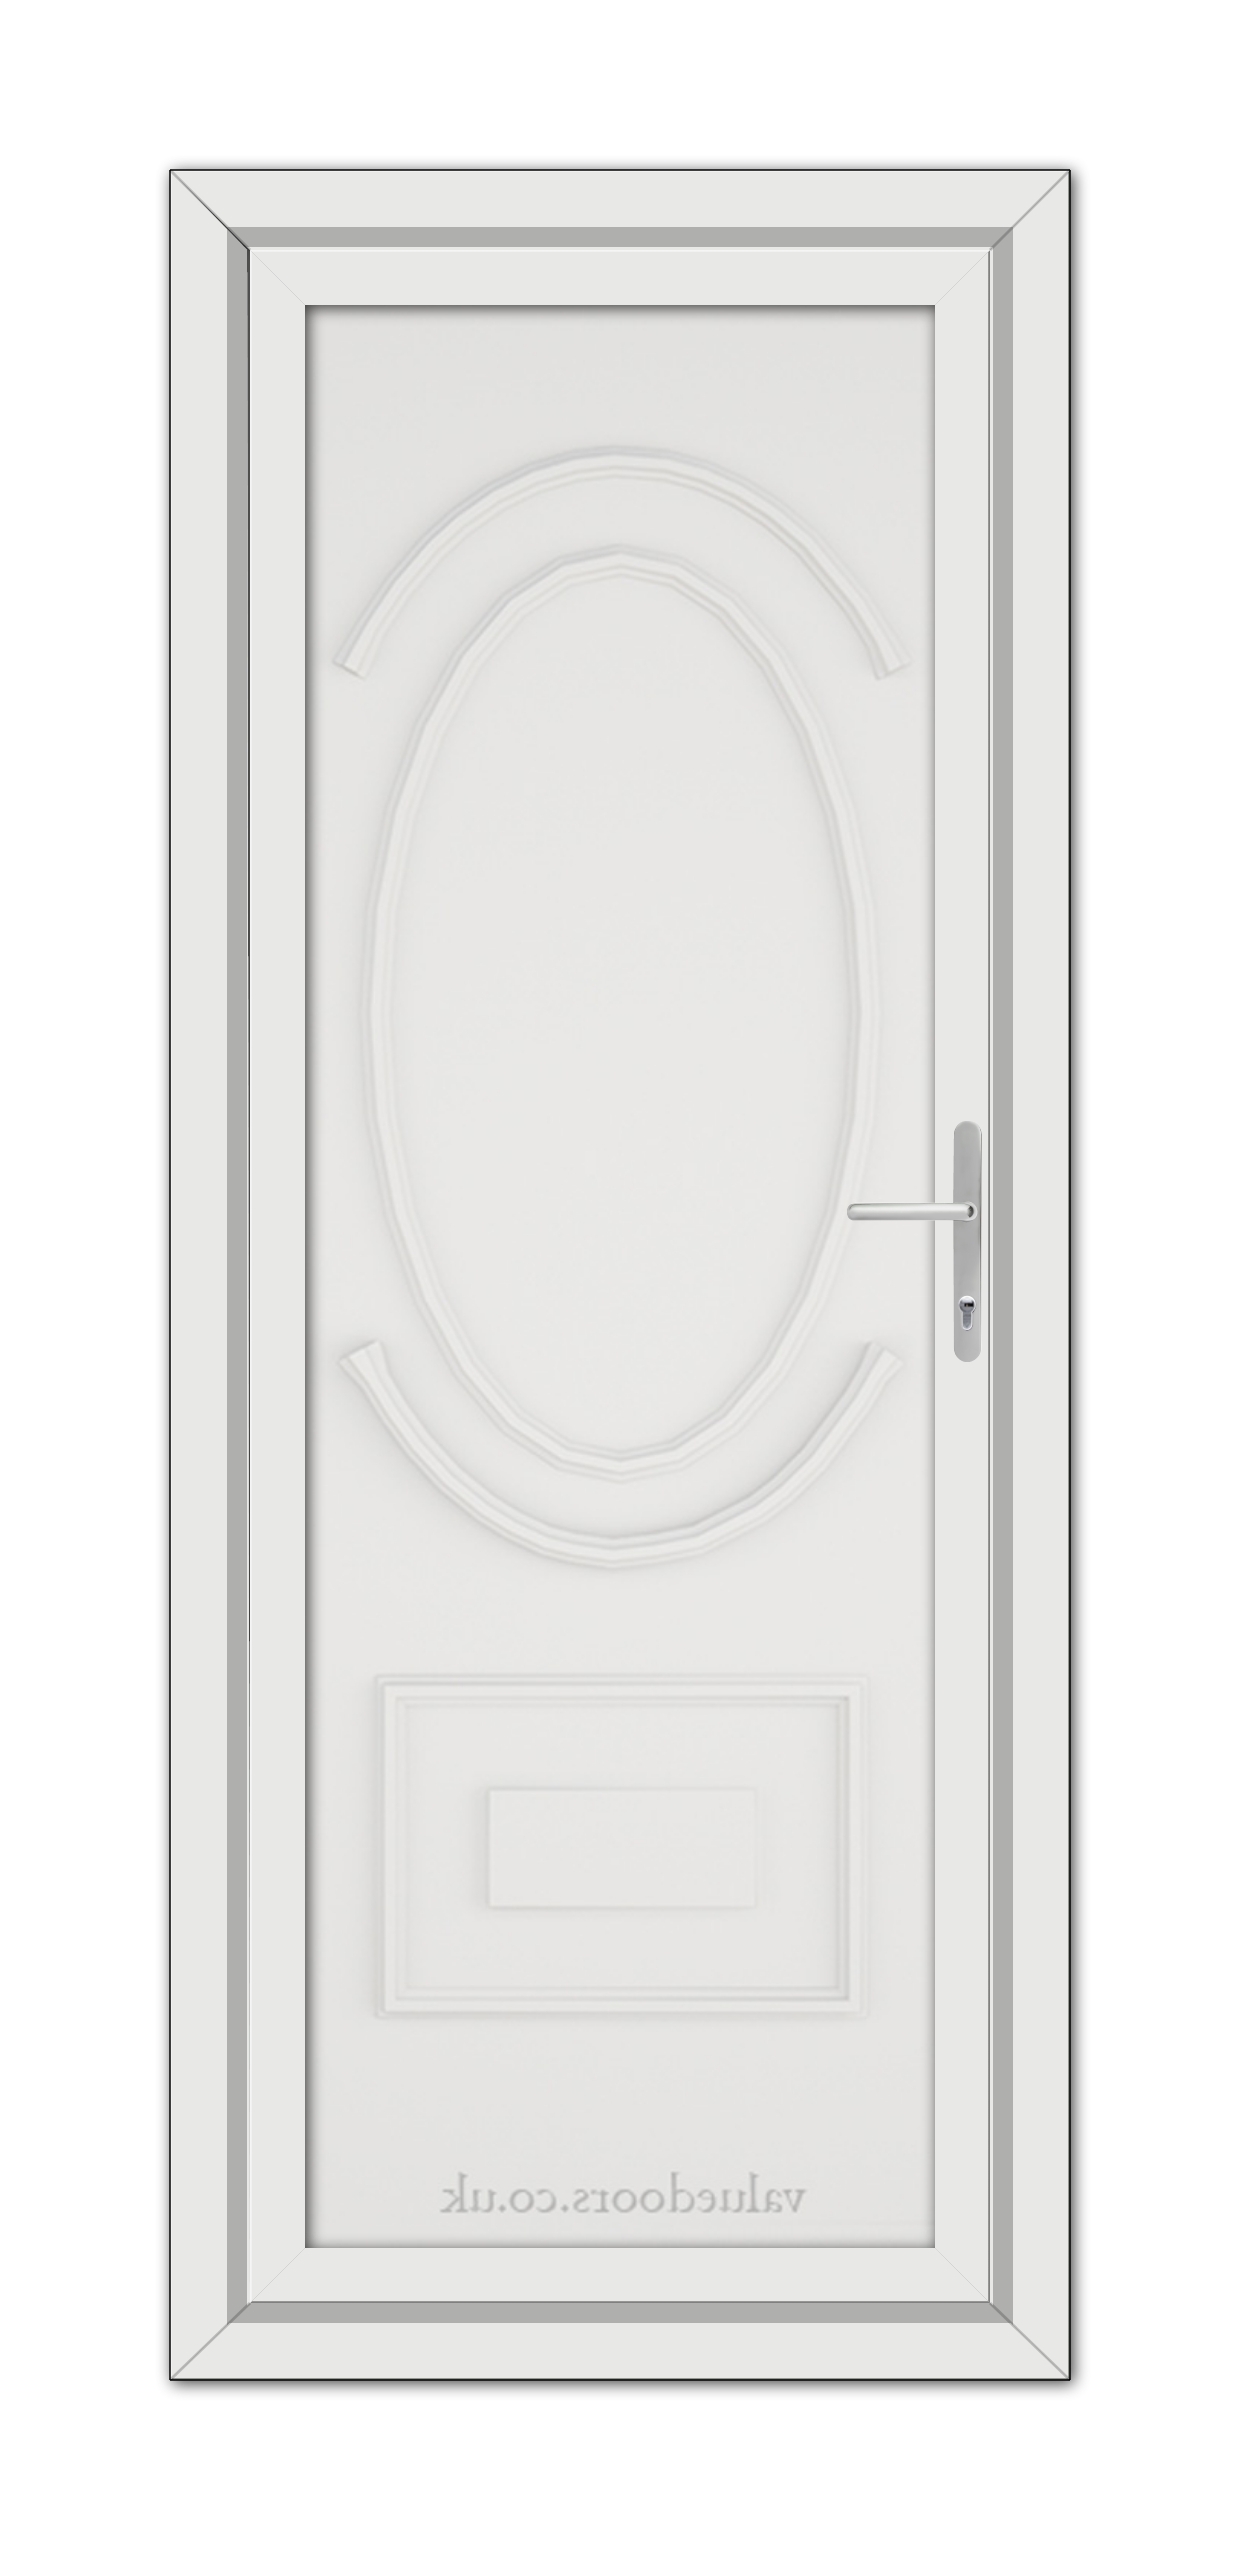 A White Richmond Solid uPVC door with an oval glass pane, decorative trim, and a modern handle, viewed from the front.